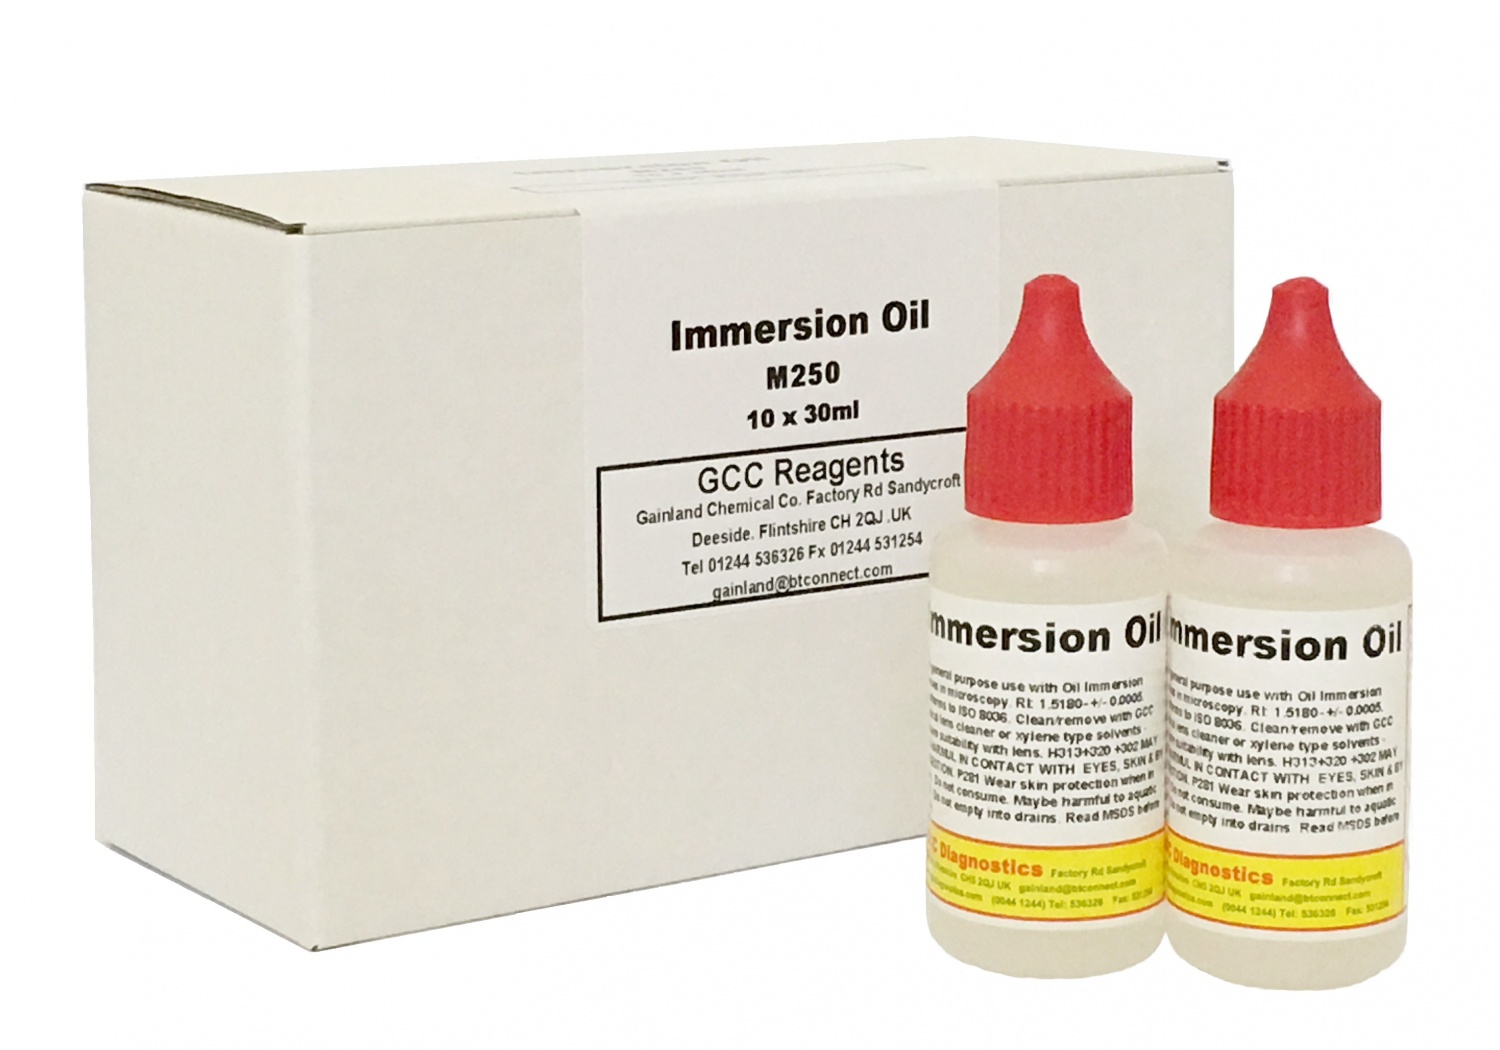 Immersion oil - M250